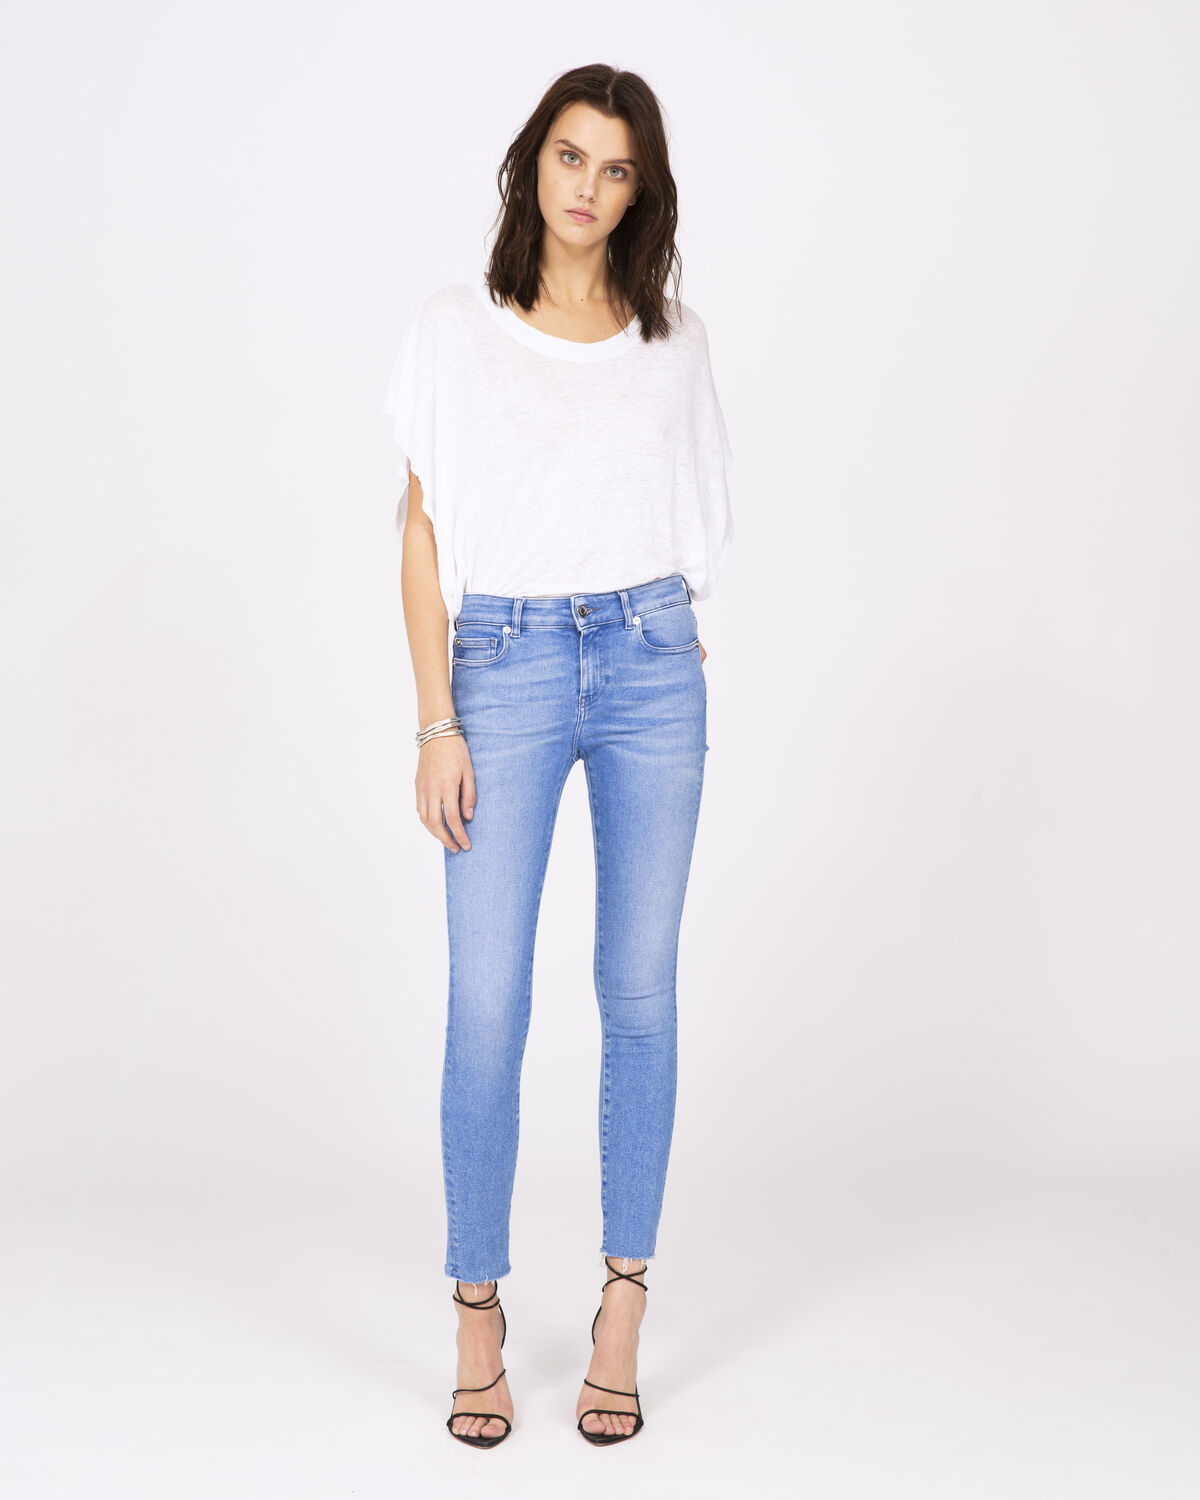 Photo of IRO Paris Rash Jeans Light Blue Denim - These Faded Blue Slim Jeans Are Distinguished By Their Sharp Edges And Frayed Details. Combine Them With A Loose T-shirt And A Pair Of Pumps For An Effortless Look. Spring Summer 19